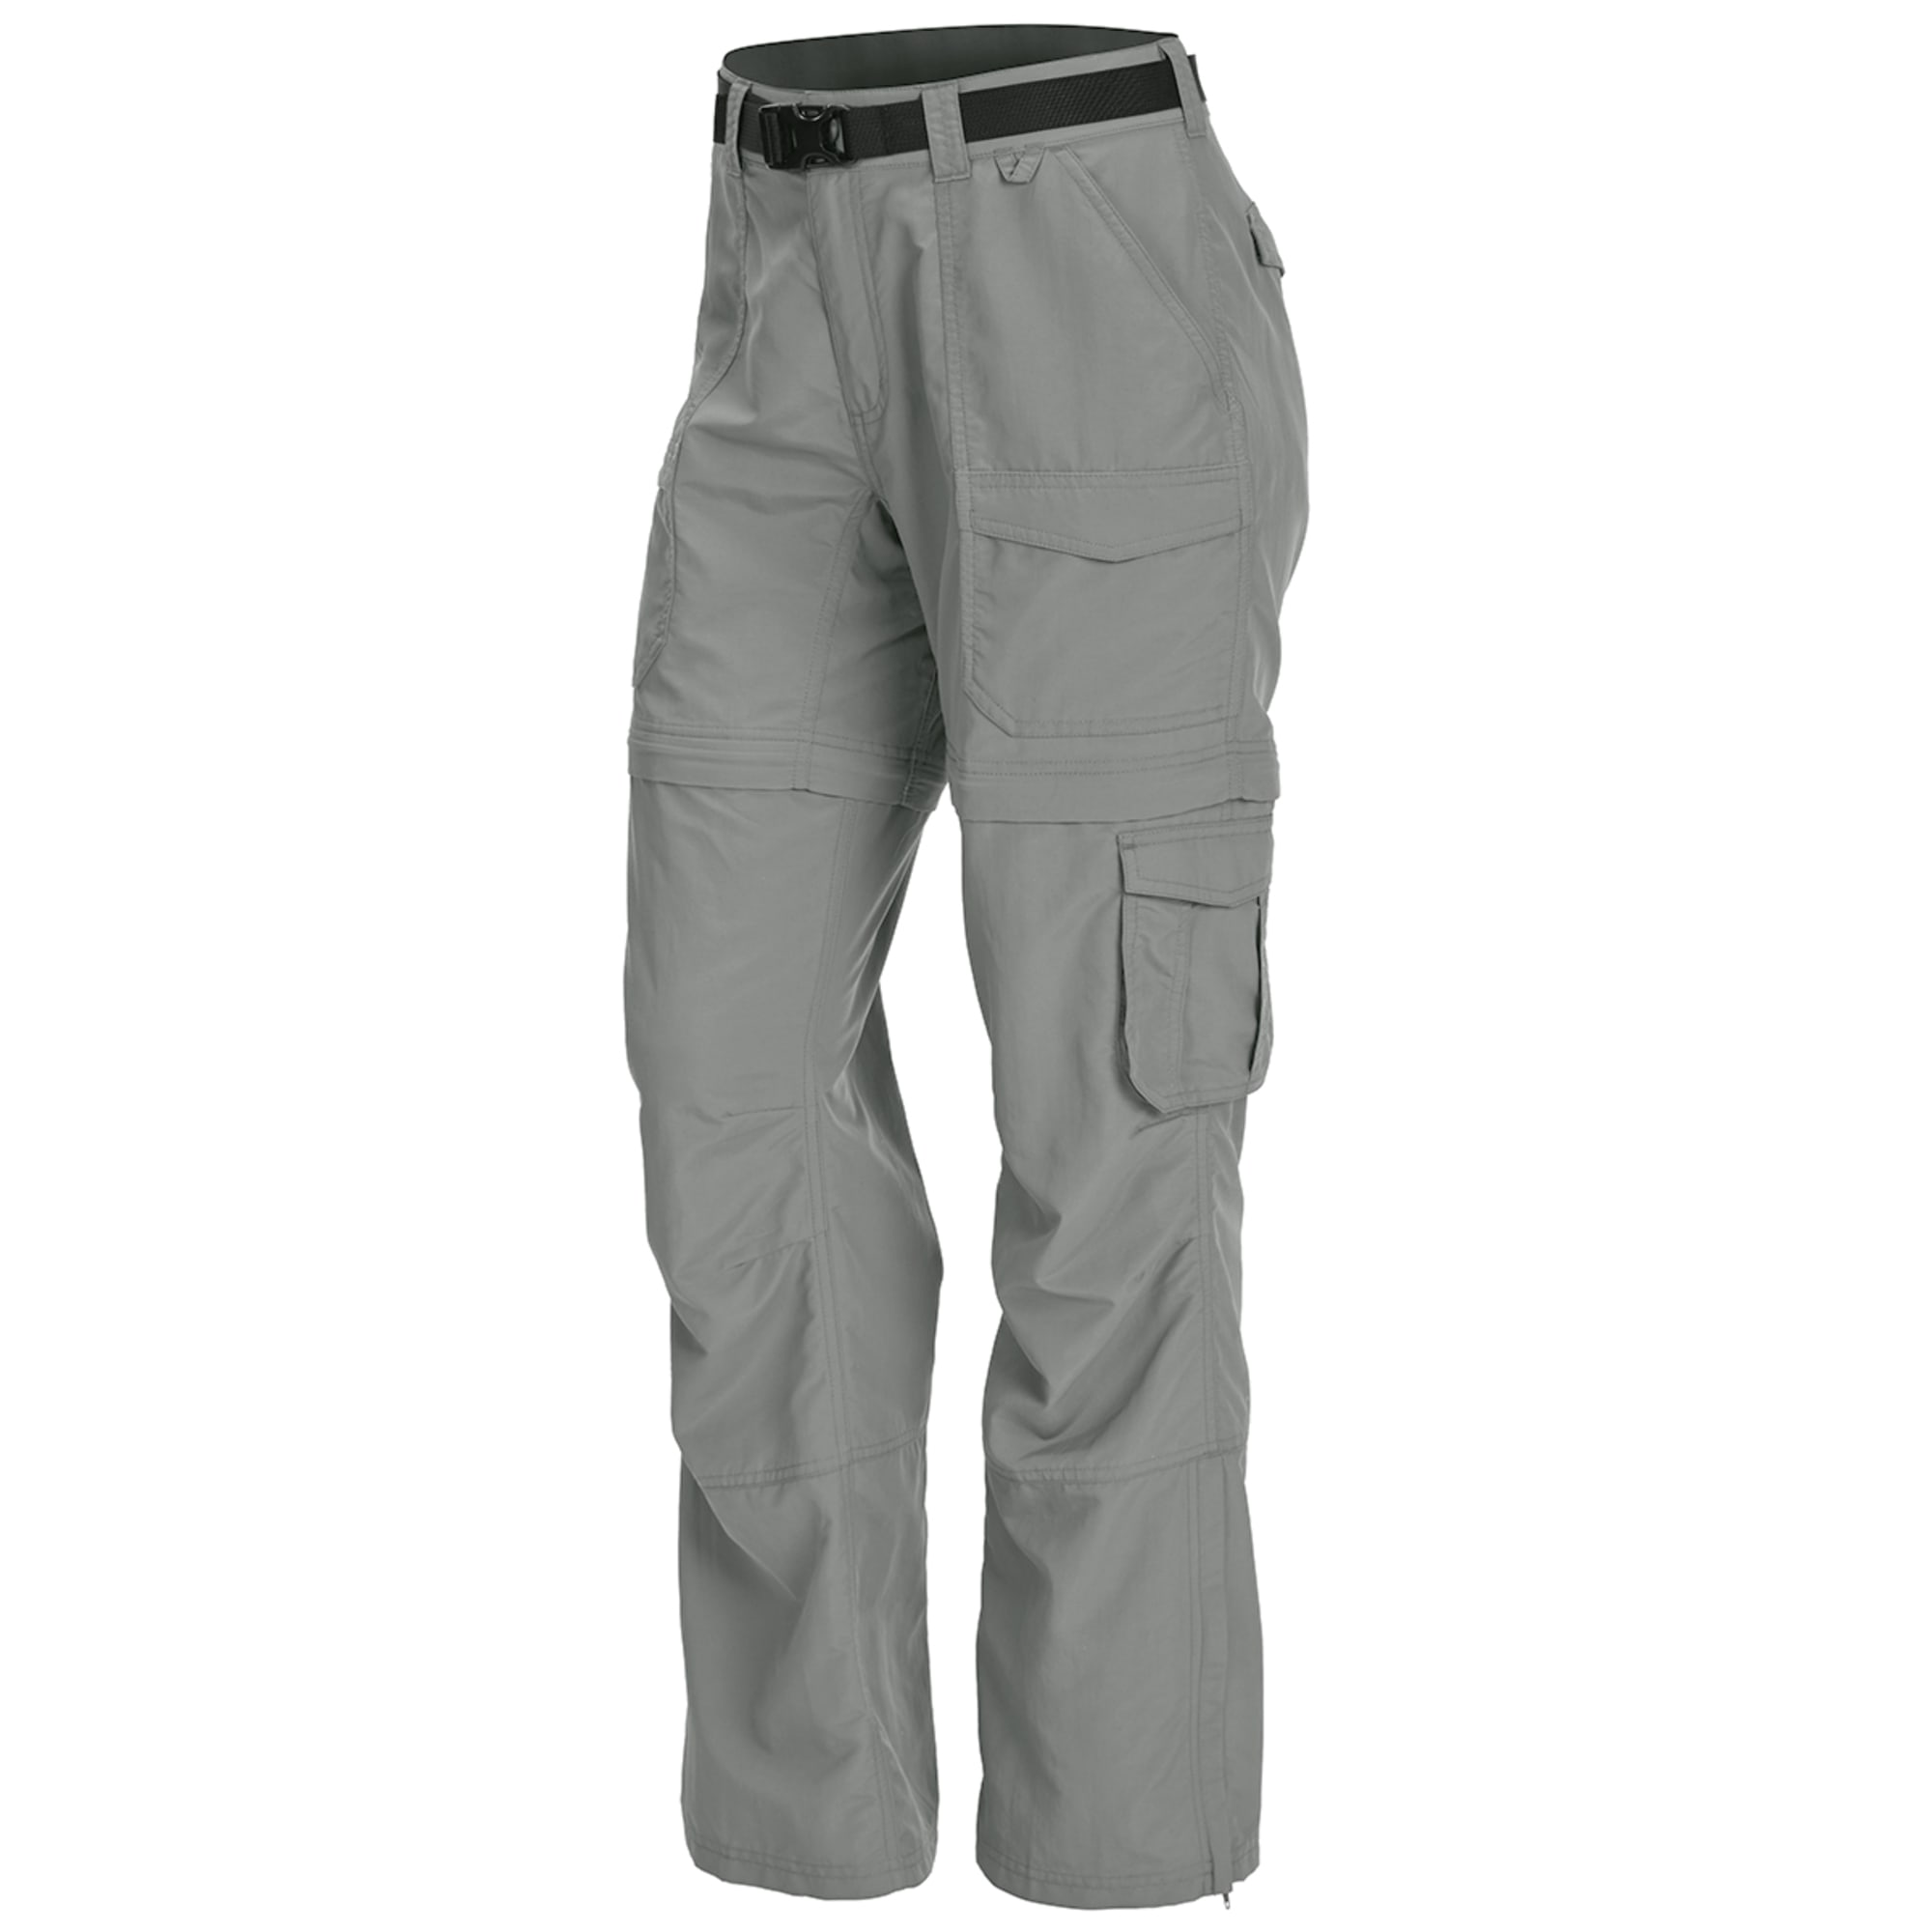 Eastern Mountain Sports 2 in 1 Belted Nylon Hiking Pants or Shorts Green  Women 2 | SidelineSwap